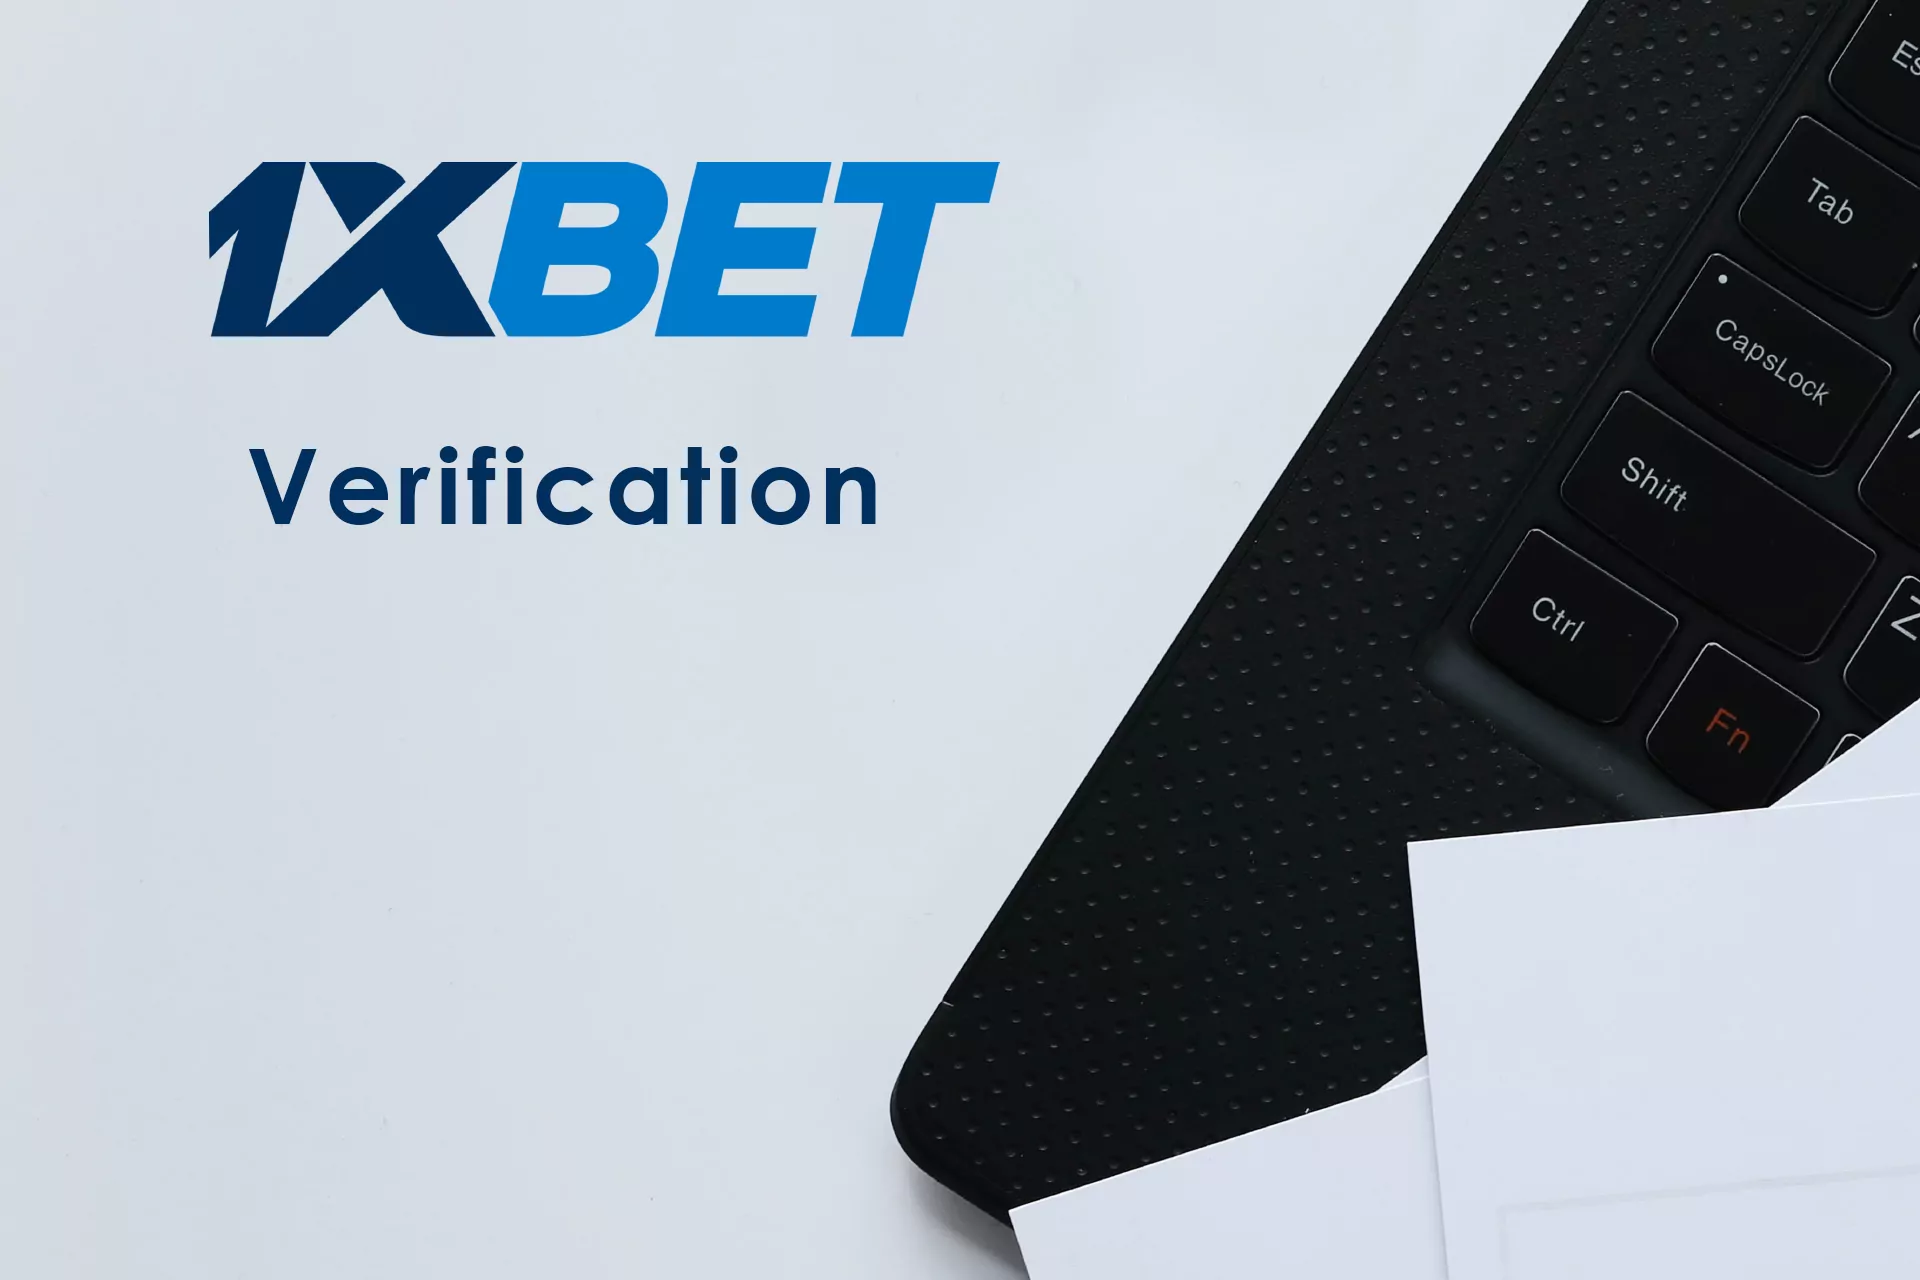 Follow the instructions to verify your 1xBet account.